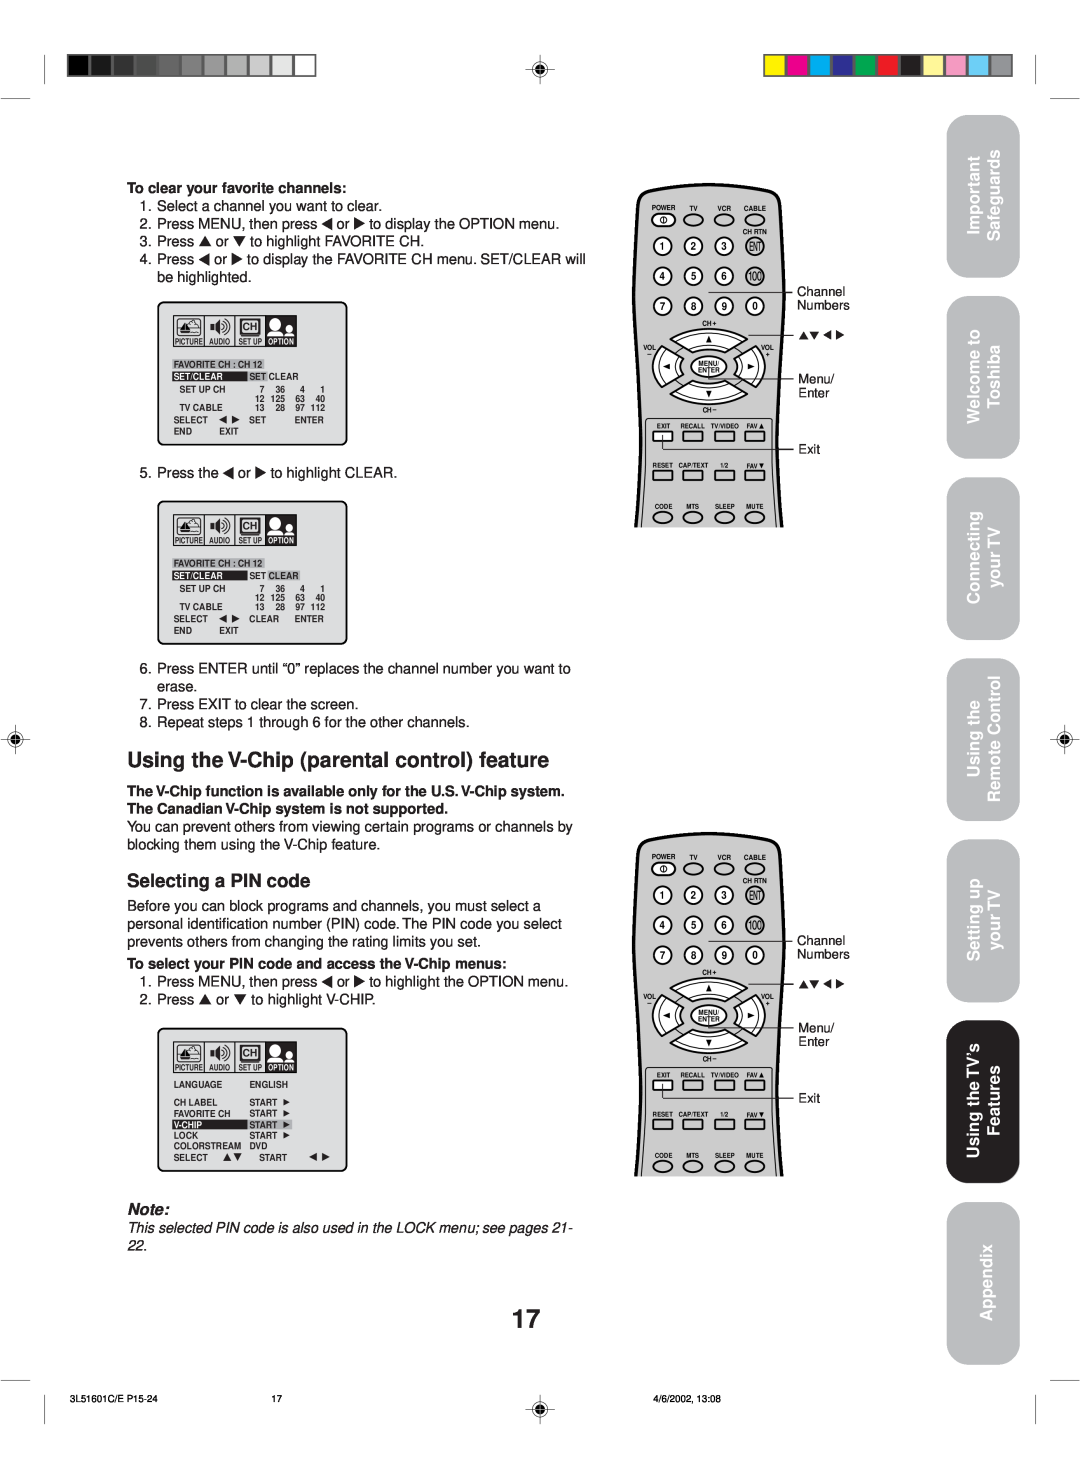 Toshiba TV 27A42 Using the V-Chip parental control feature, Selecting a PIN code, Safeguards, Setting up your TV, Appendix 